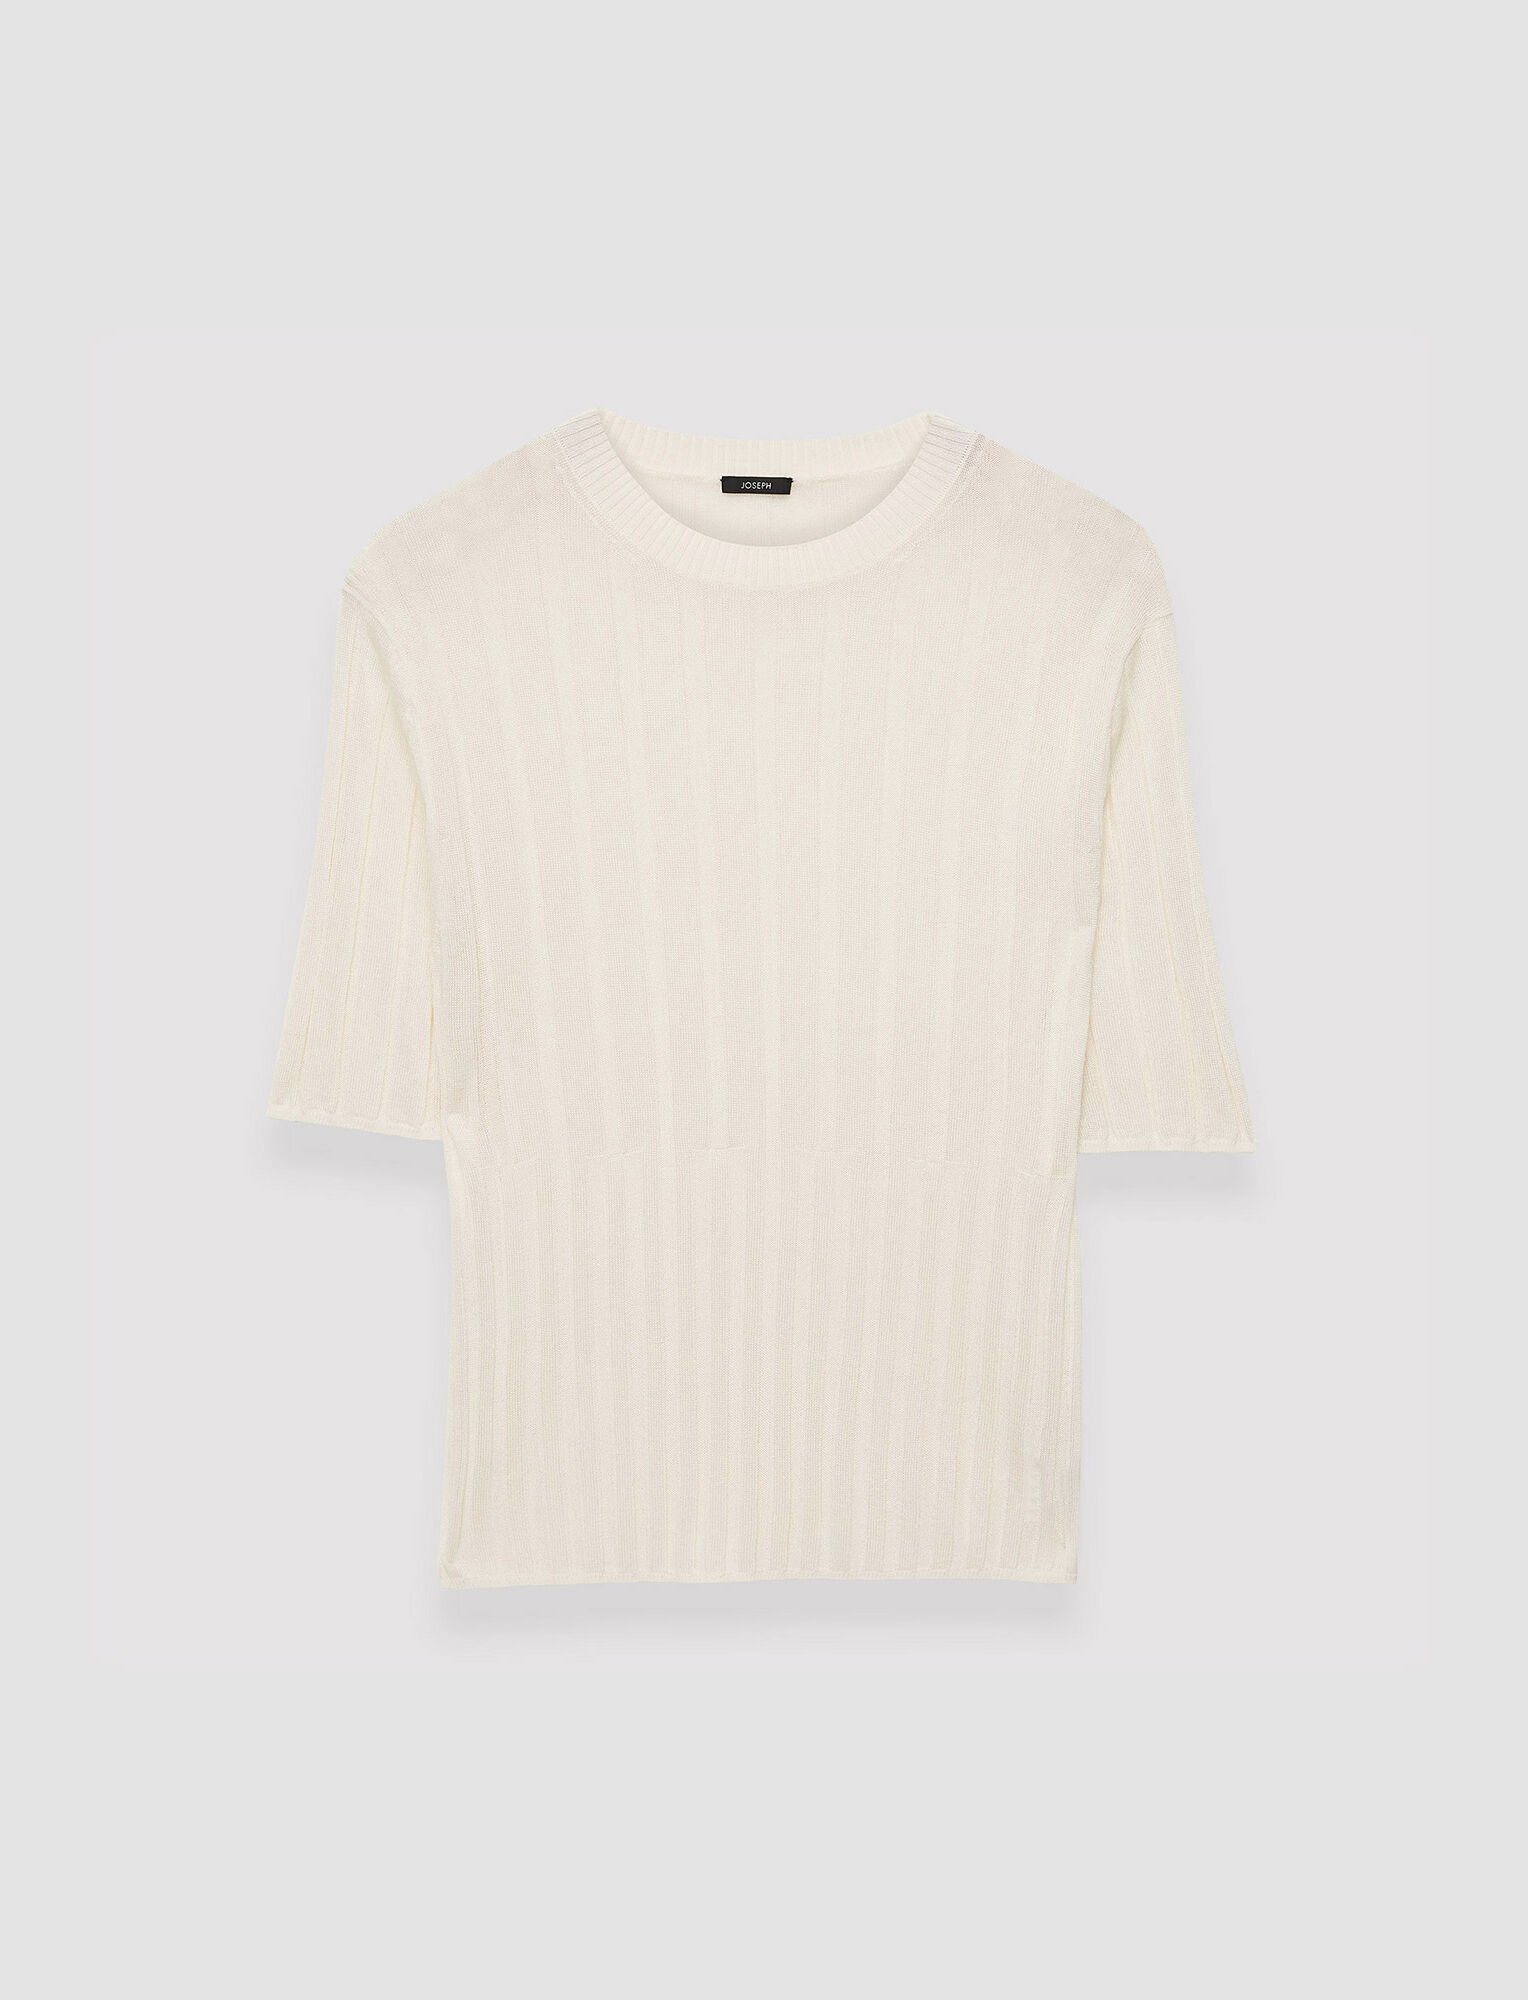 Joseph, Crisp Rayon Knitted T-Shirt, in Ivory